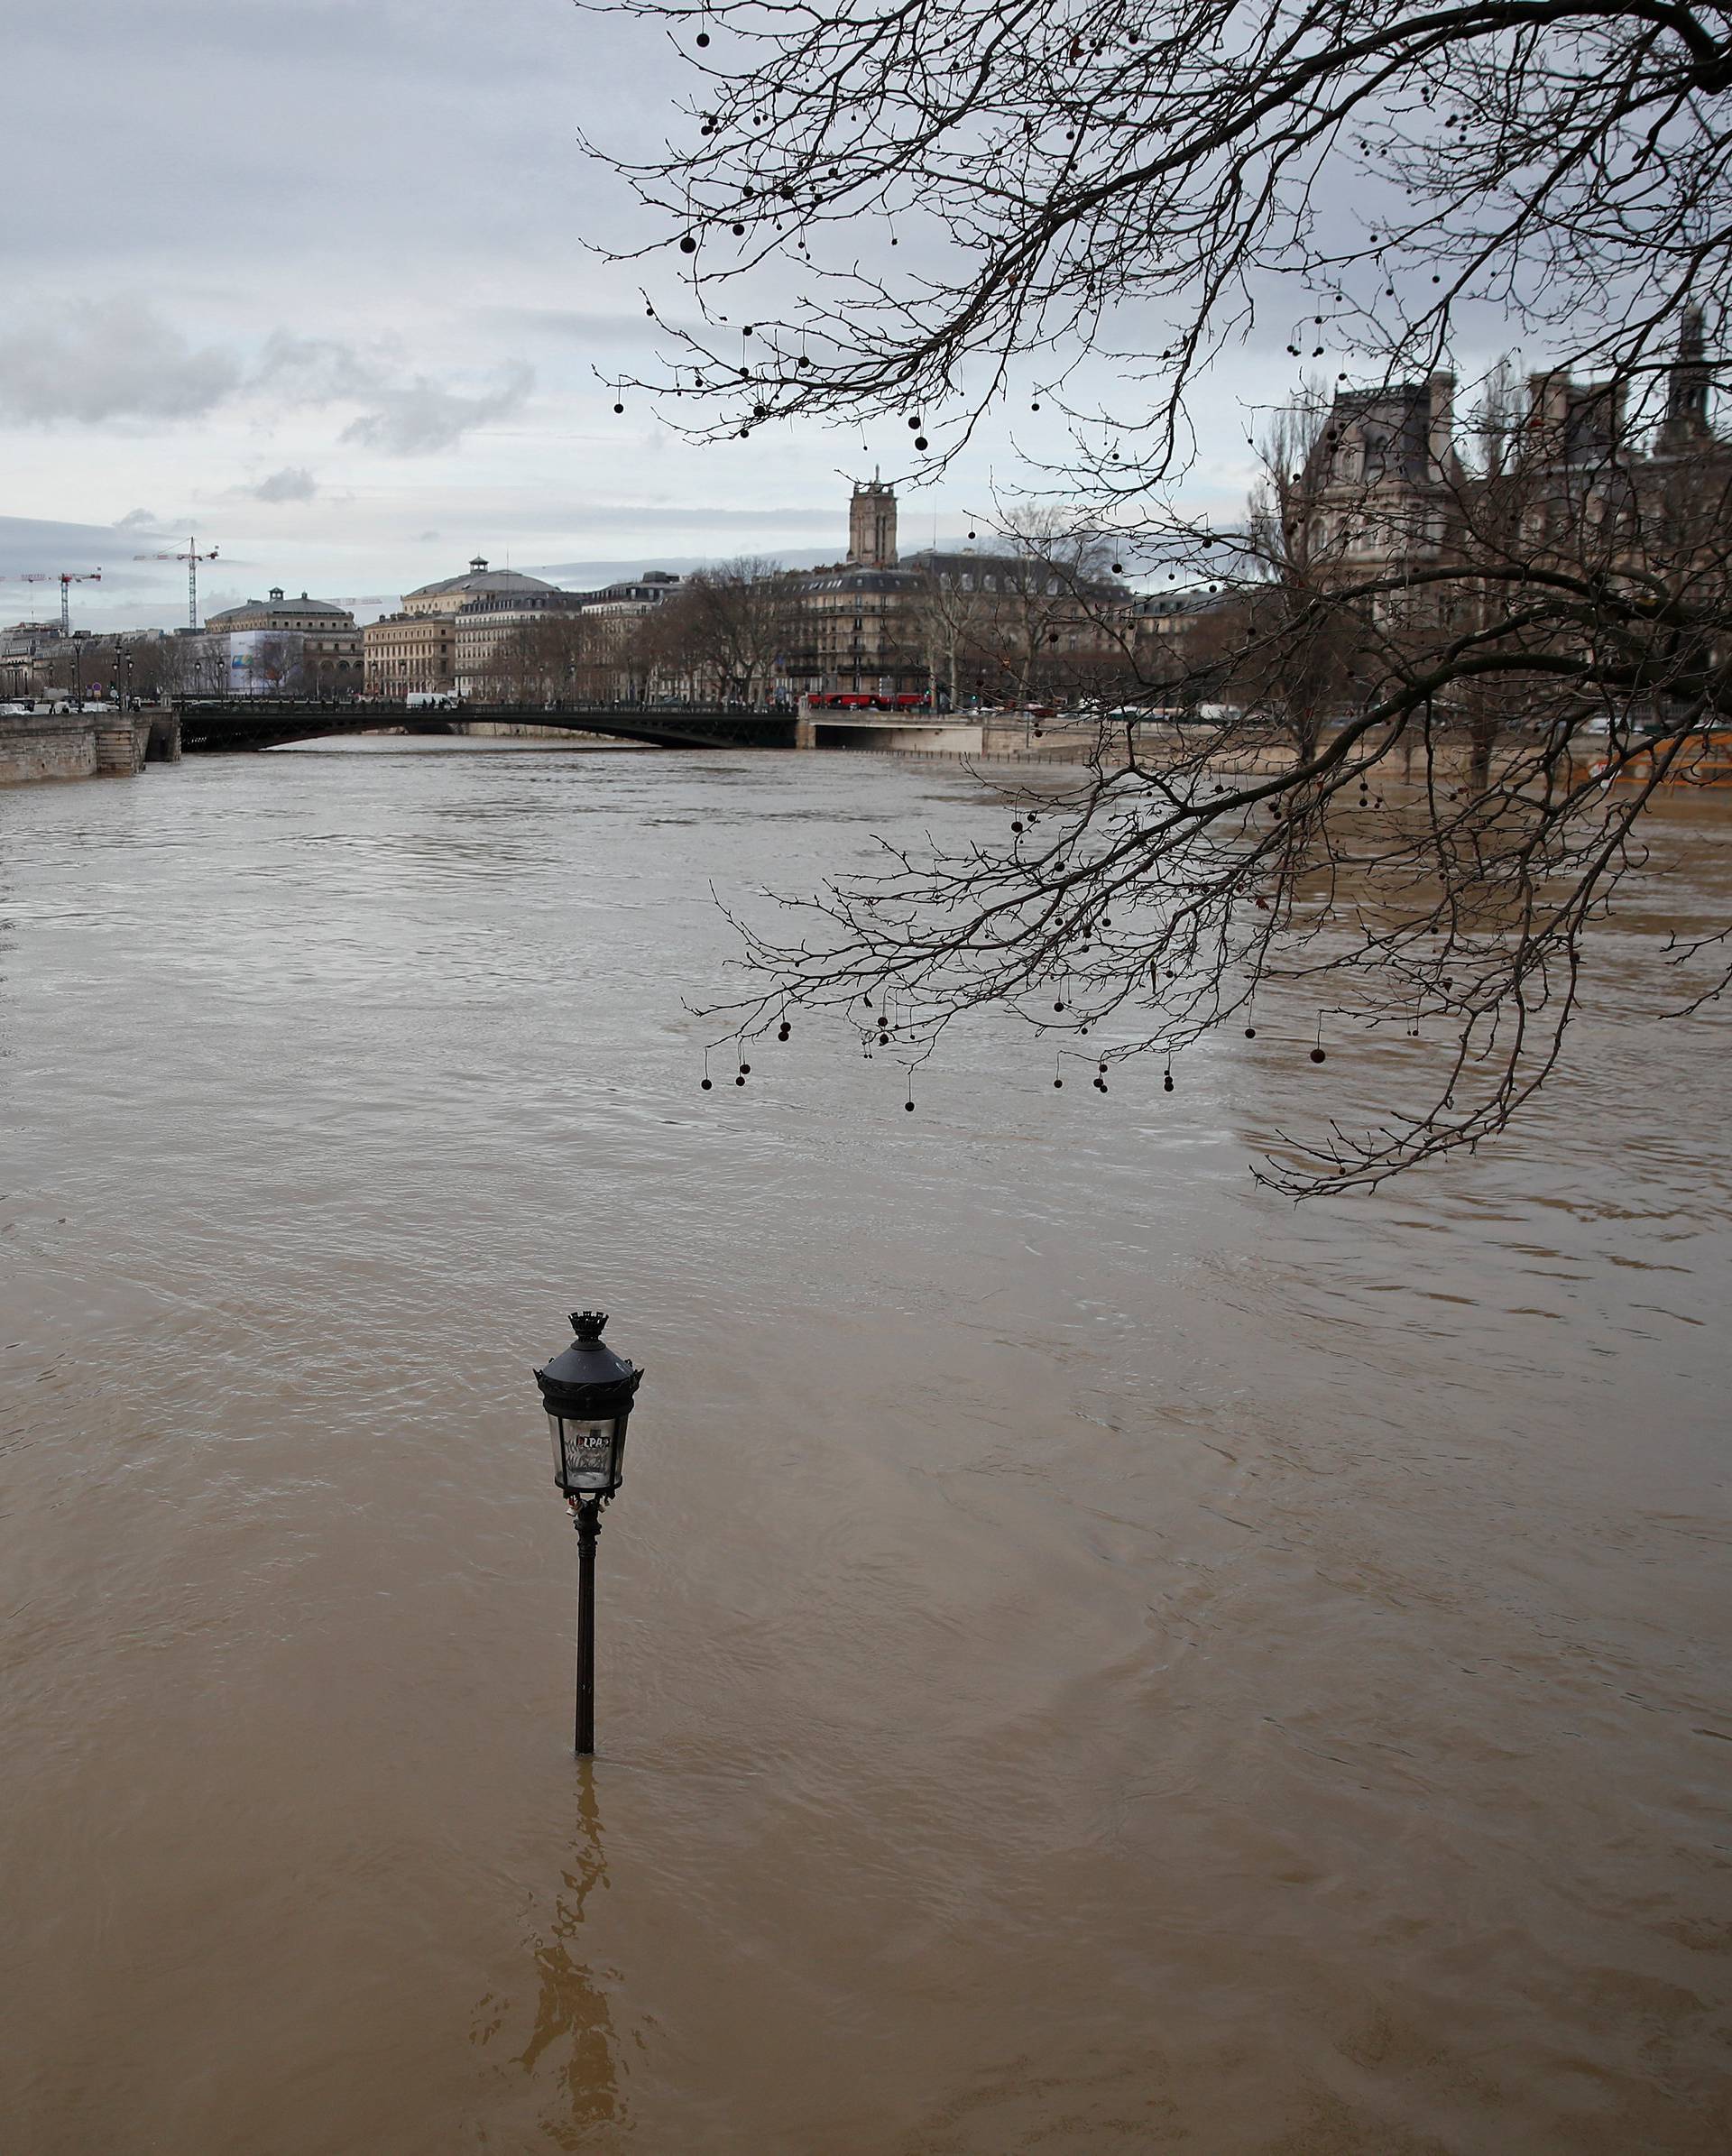 A street-lamp is seen on the flooded banks of the Seine River in Paris